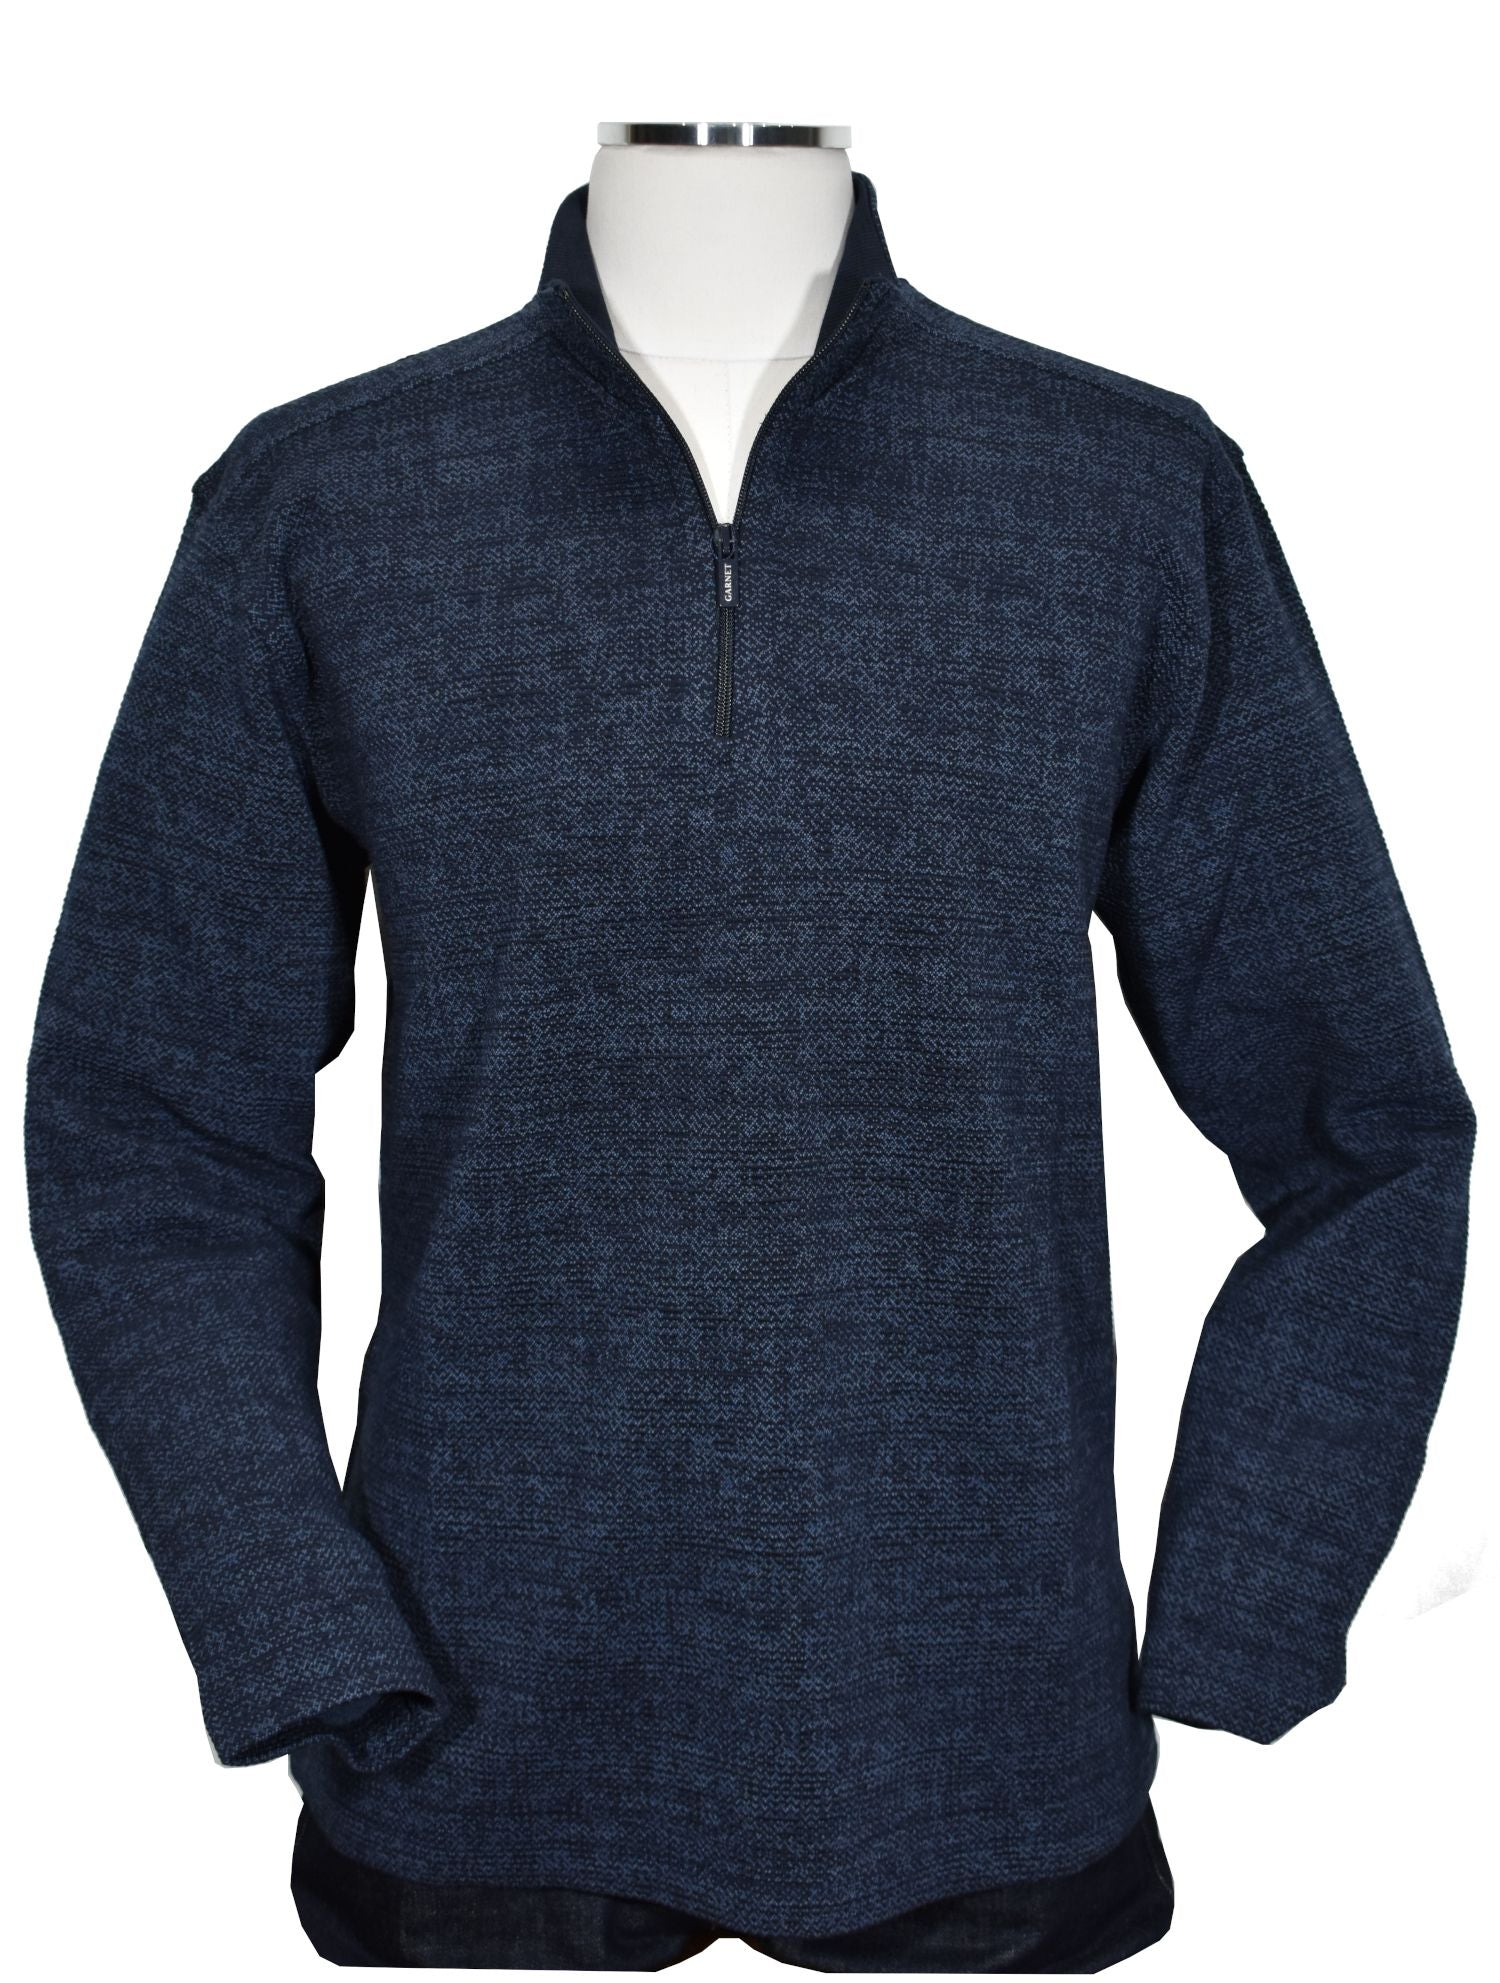 Achieve a contemporary look and feel with the ZA26007 Indigo Performance Zip. Featuring a lightweight, luxurious tech fabric with a velvety finish, this mock zip features a classic two-tone weave to add textural depth to your style. Enjoy superior comfort and quality with this timeless classic.  Classic fit.